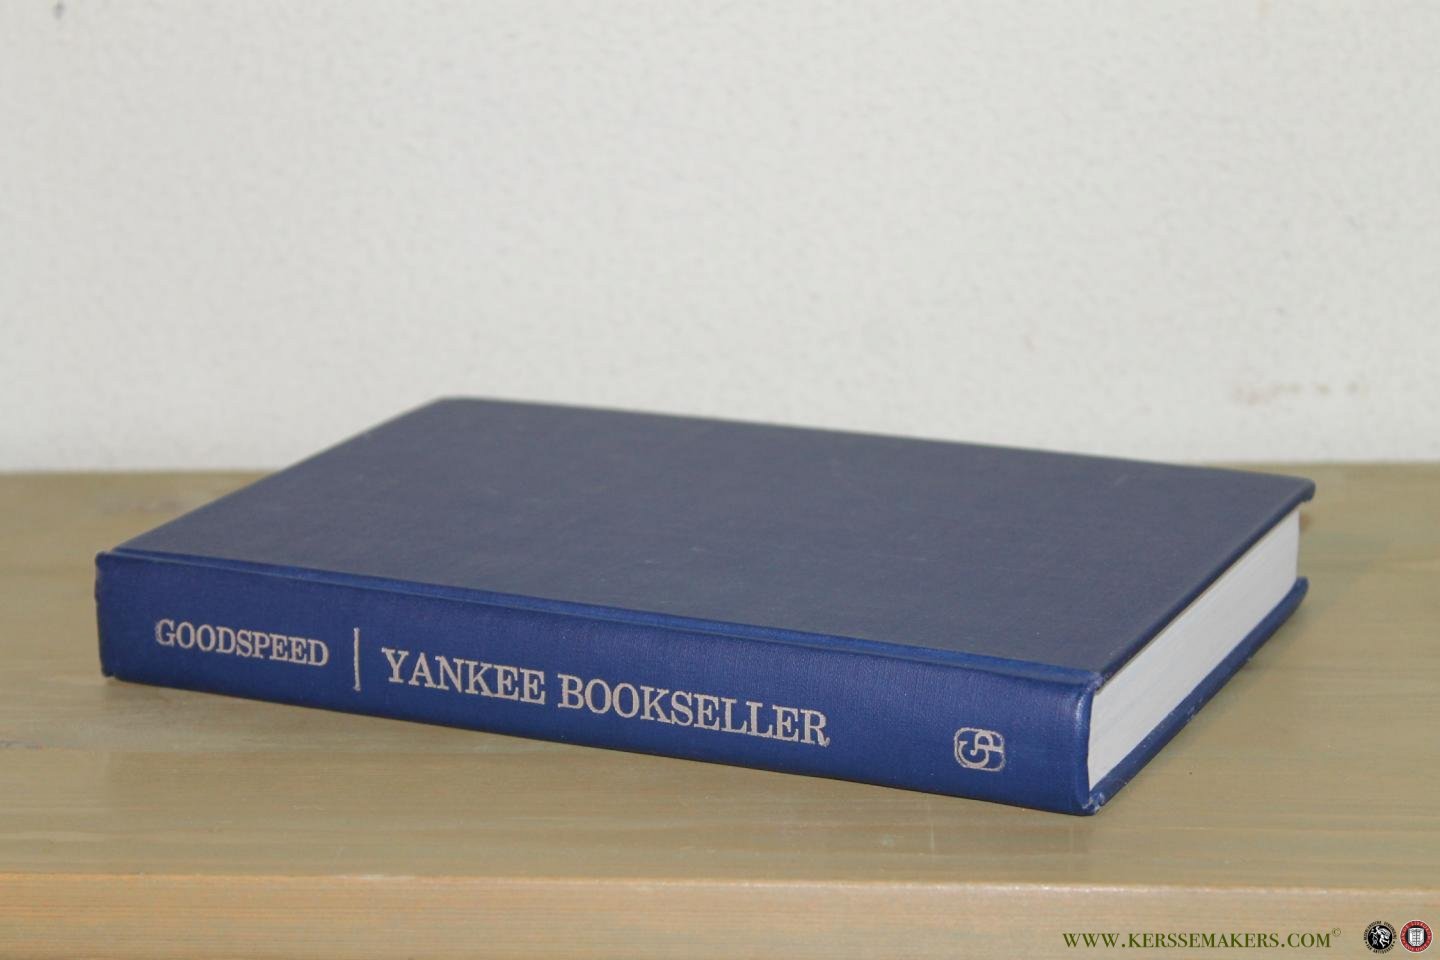 GOODSPEED, Charles E. - Yankee Bookseller. Being the Reminiscences of Charles E. Goodspeed. With Many Illustrations.